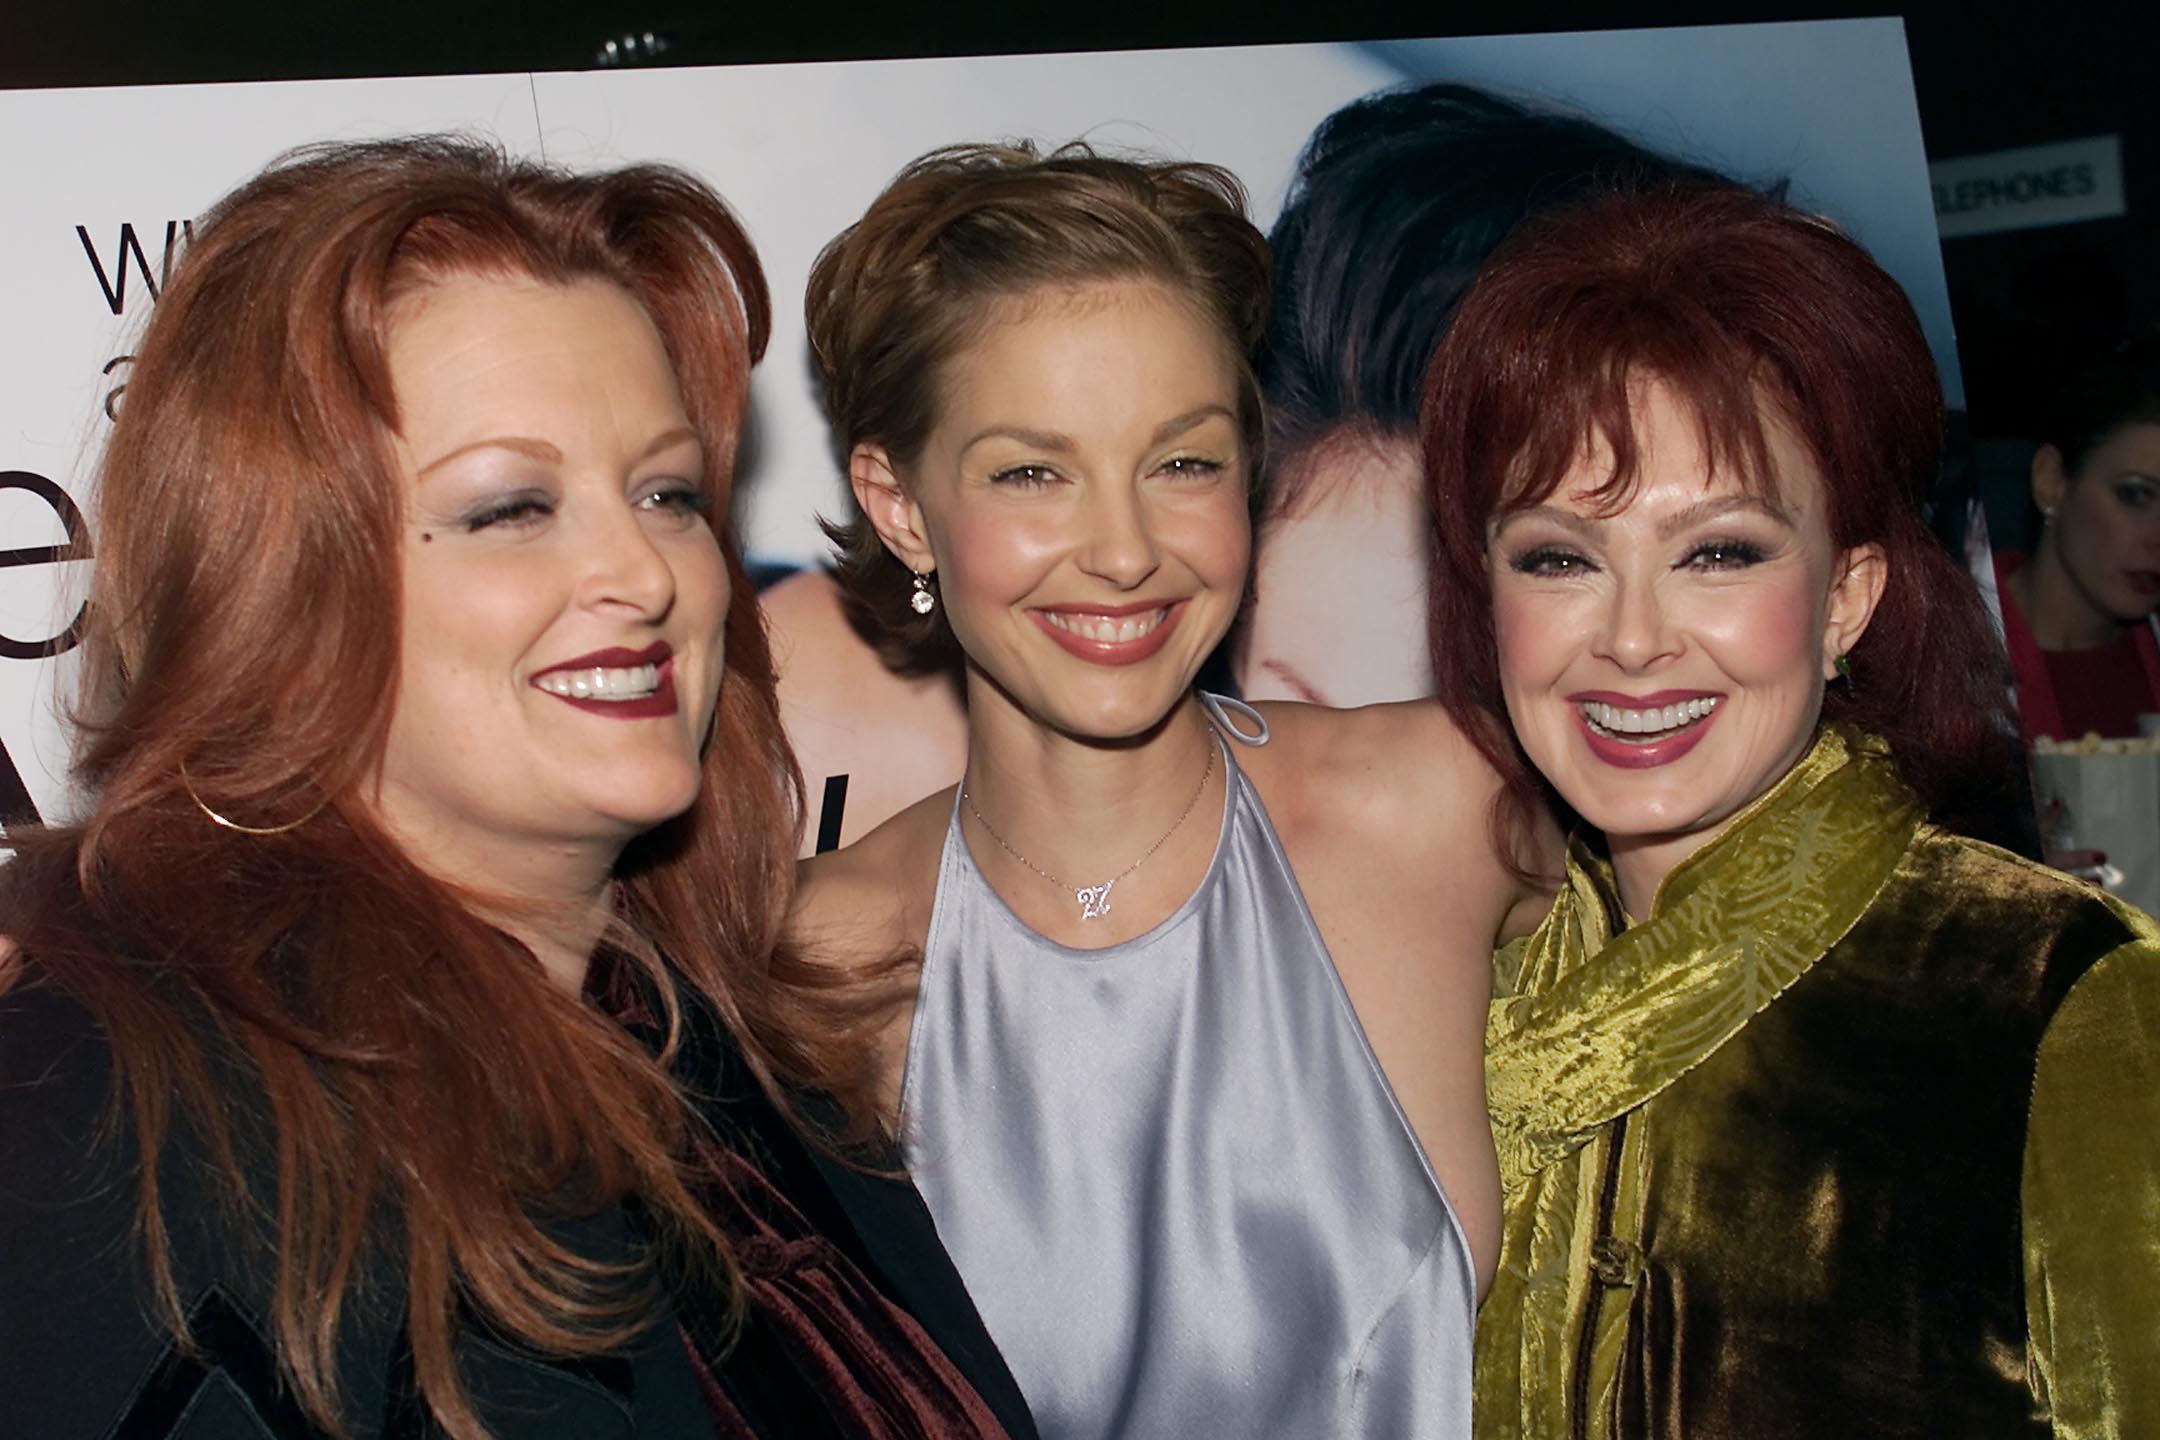 Singer Wynonna Judd and actress Ashely Judd with their mother, country singer Naomi Judd on March 28, 2001 in New York City. | Source: Getty Images